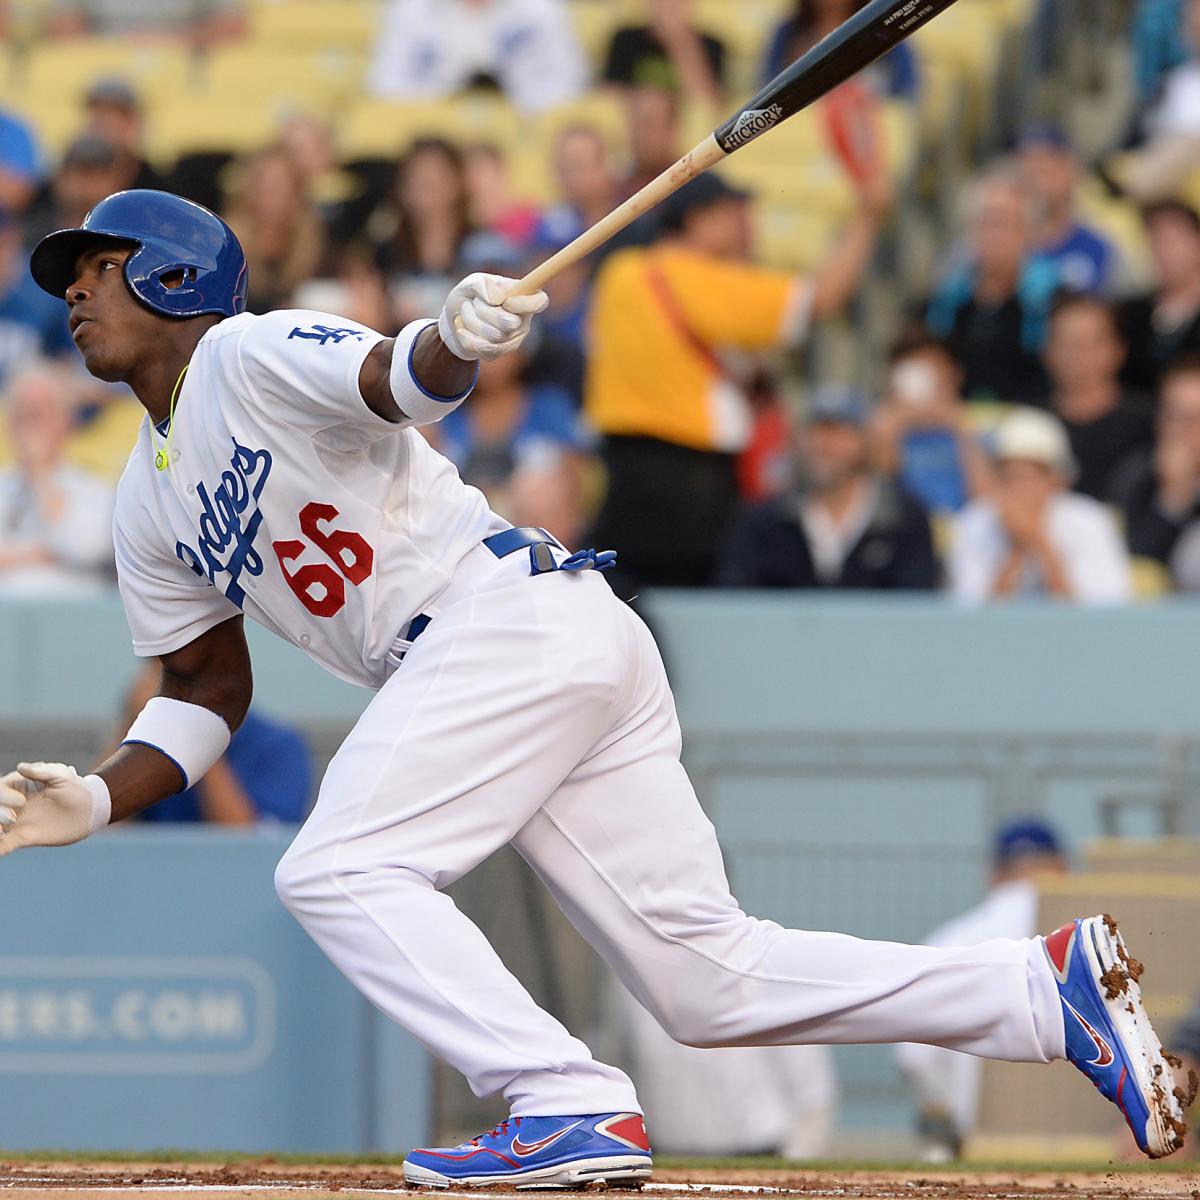 NBA Buzz - Two years ago, Yasiel Puig hit this home run in the